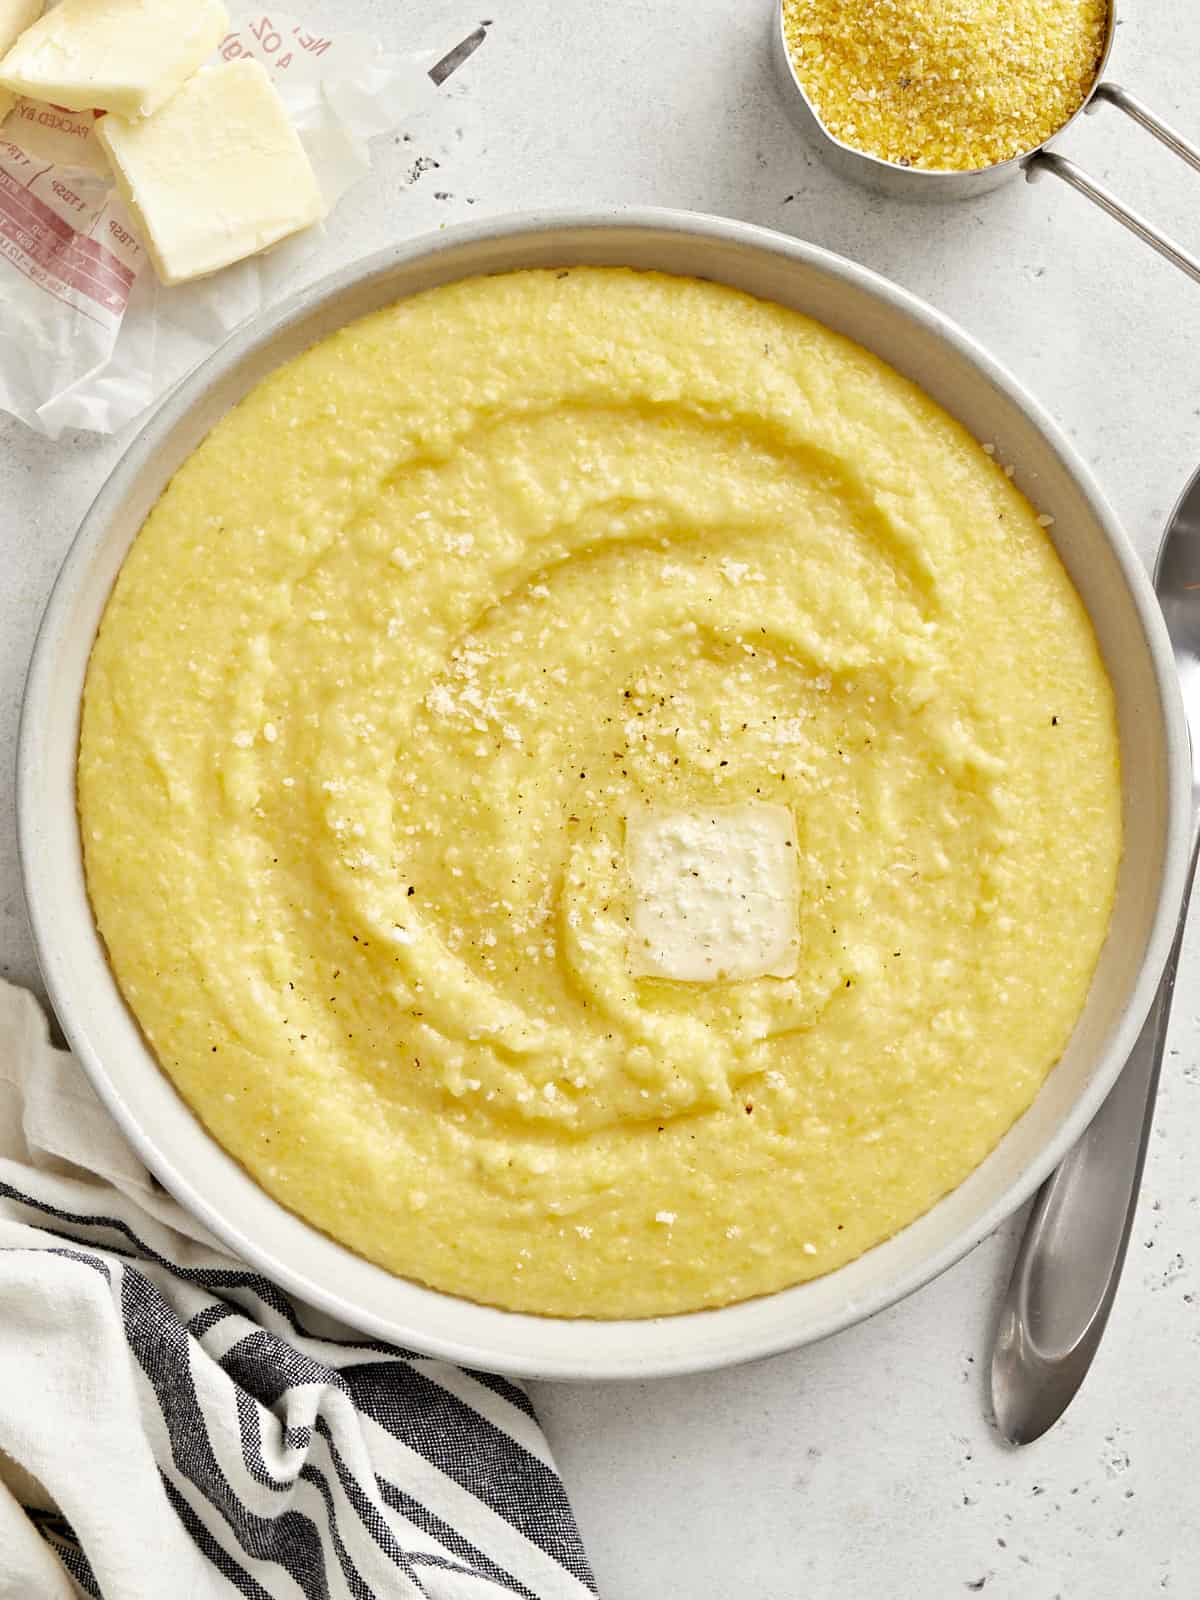 Overhead view of a bowl of polenta with a pat of butter on top.